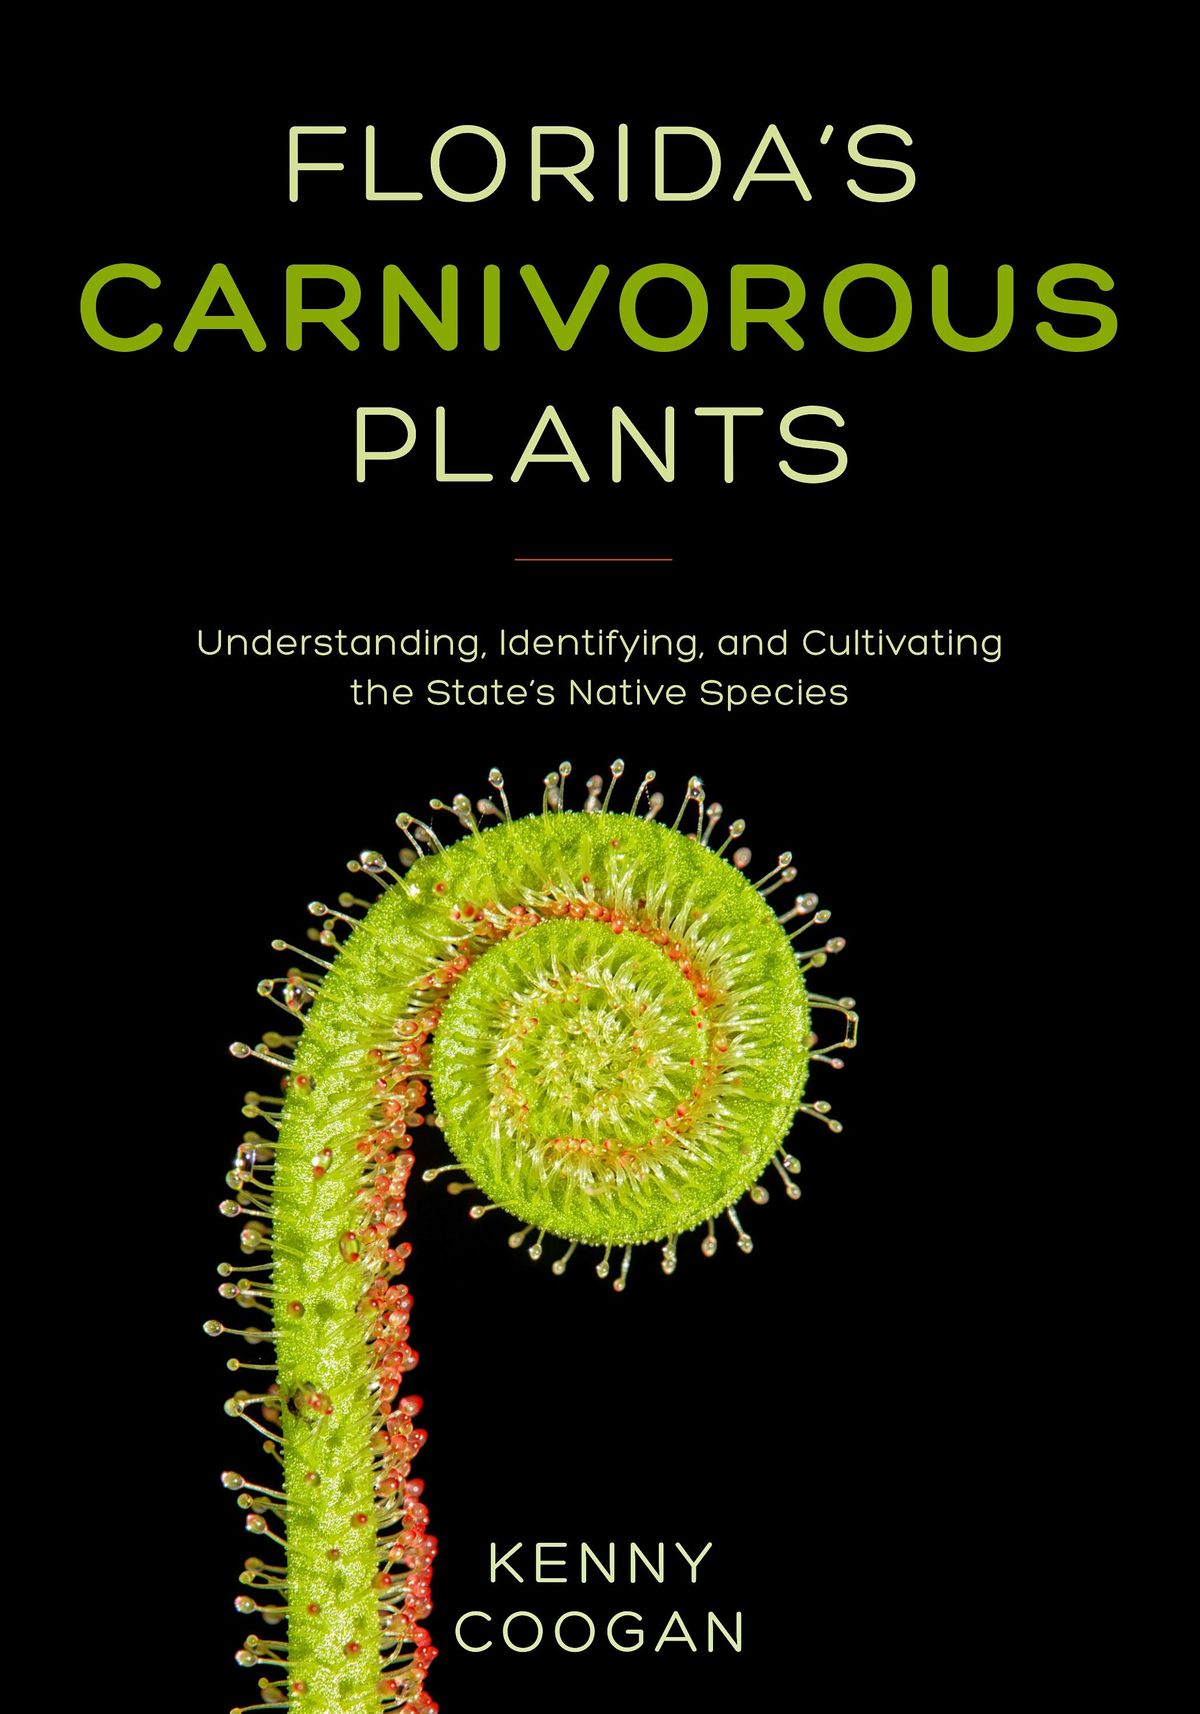 Make and Take Carnivorous Plant Bog with author Kenny Coogan